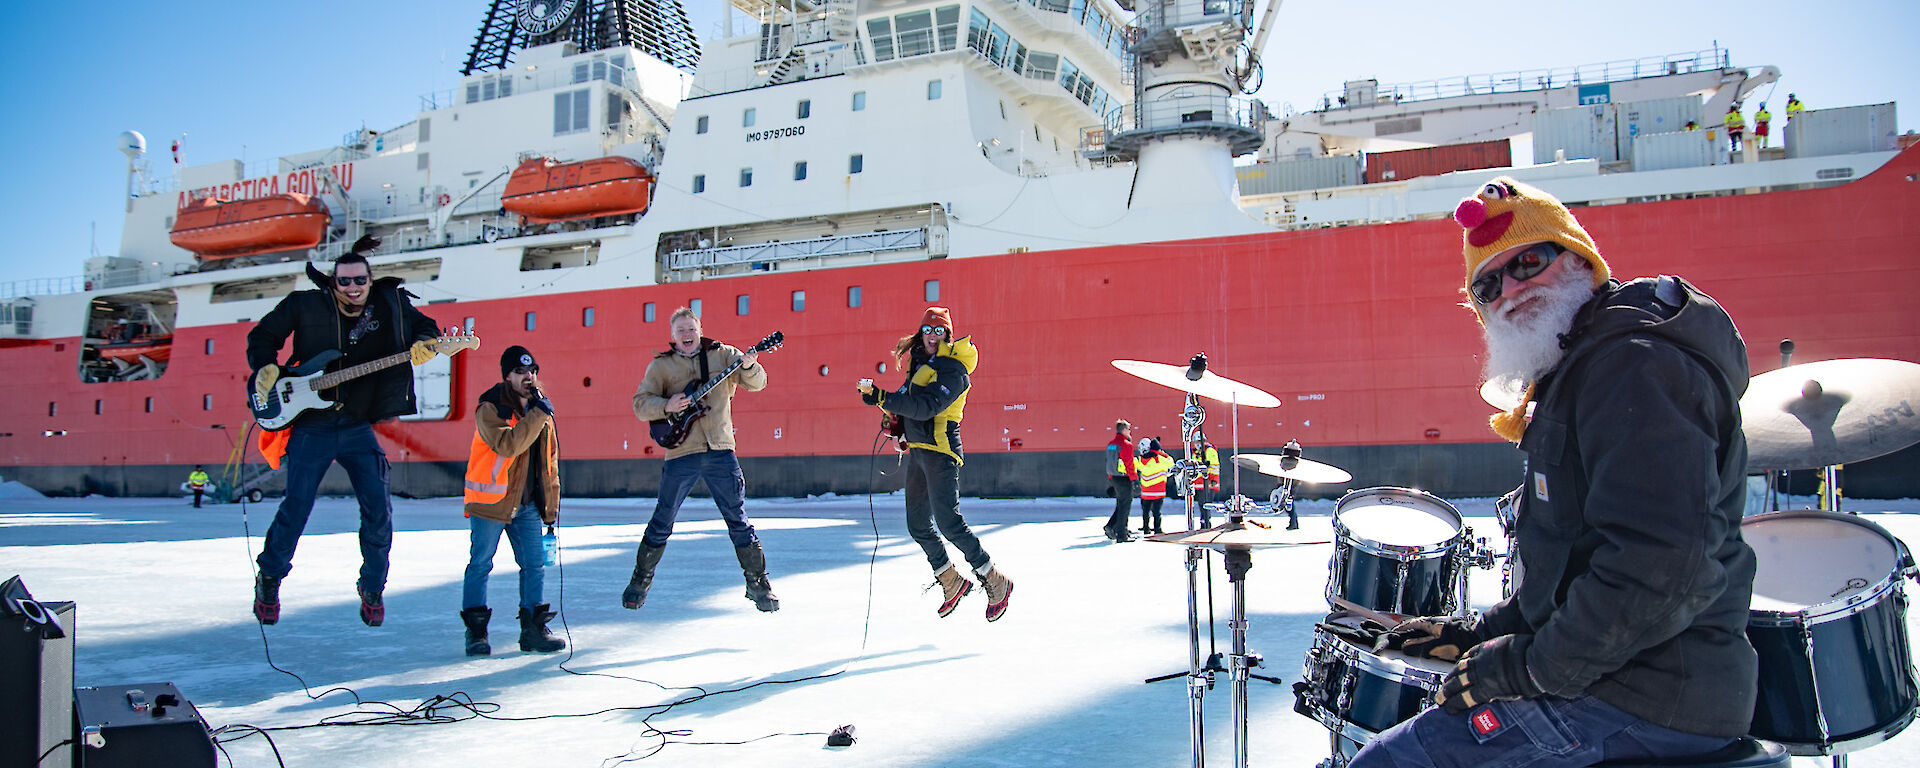 A band perform on the ice in front of a big red ship